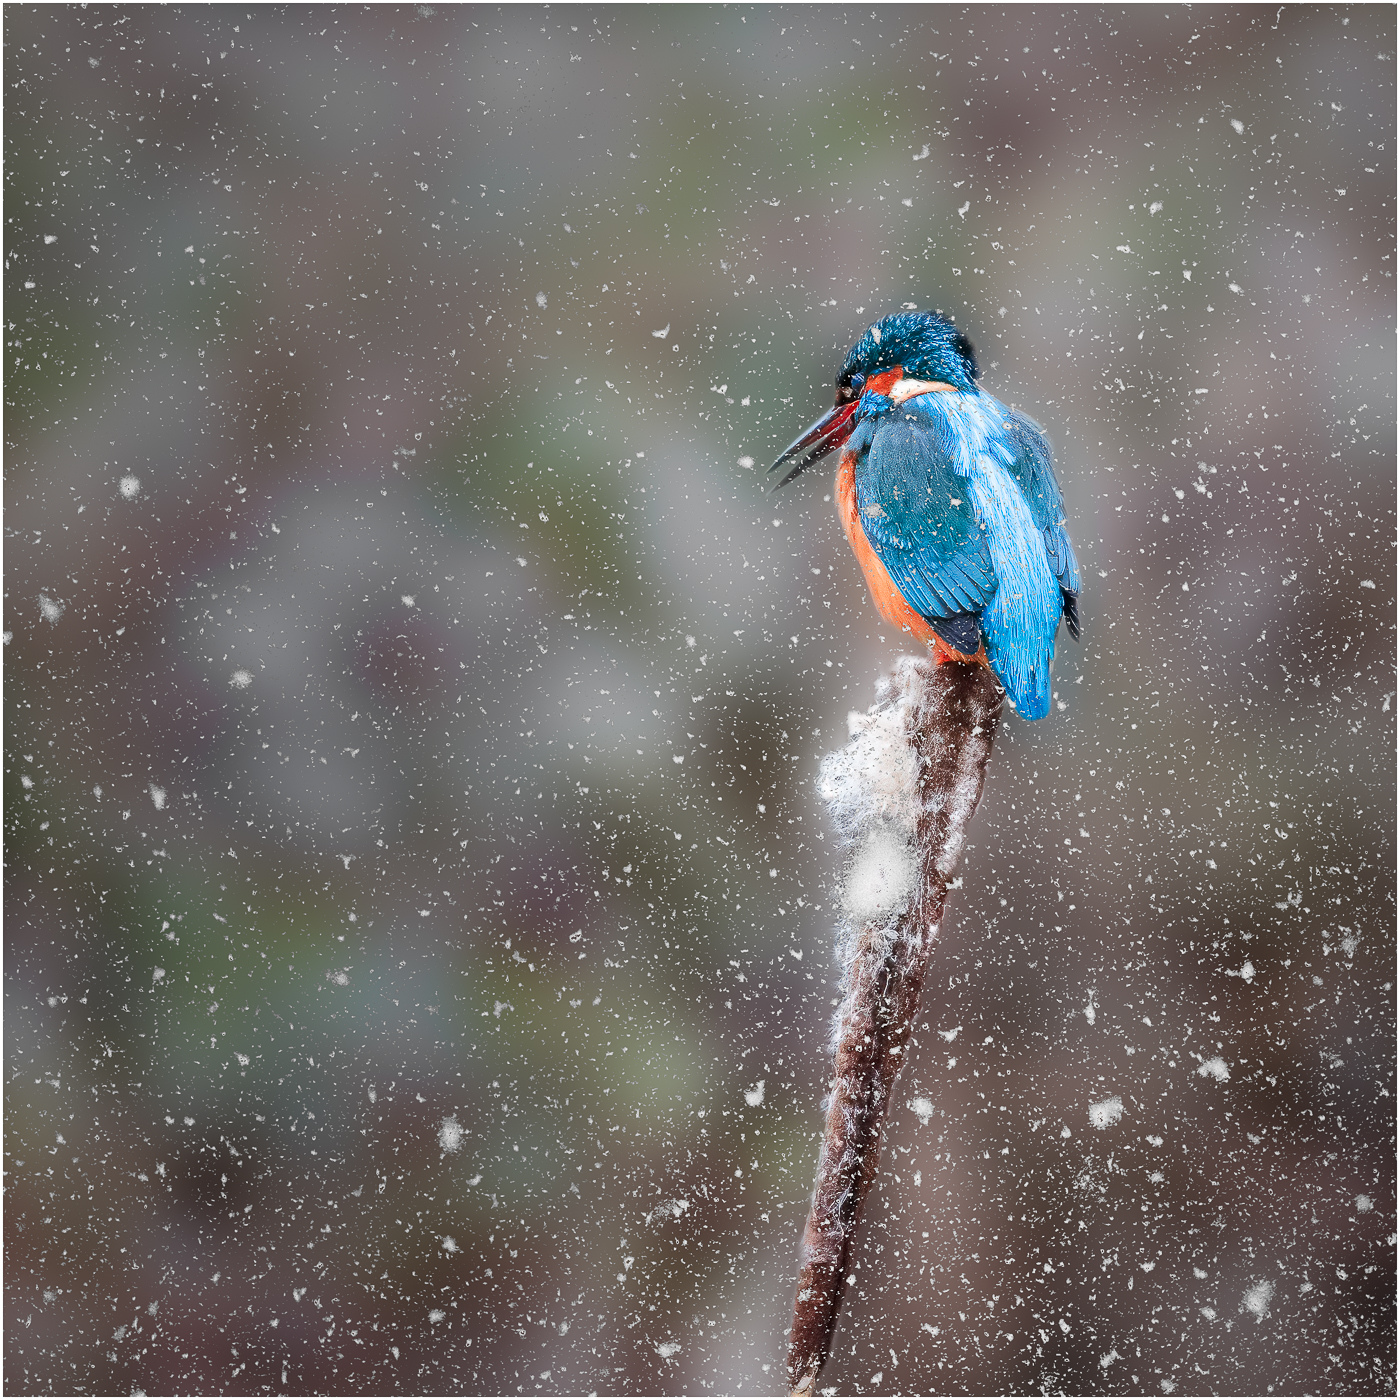 KINGFISHER IN SNOW by Jack Worsnop